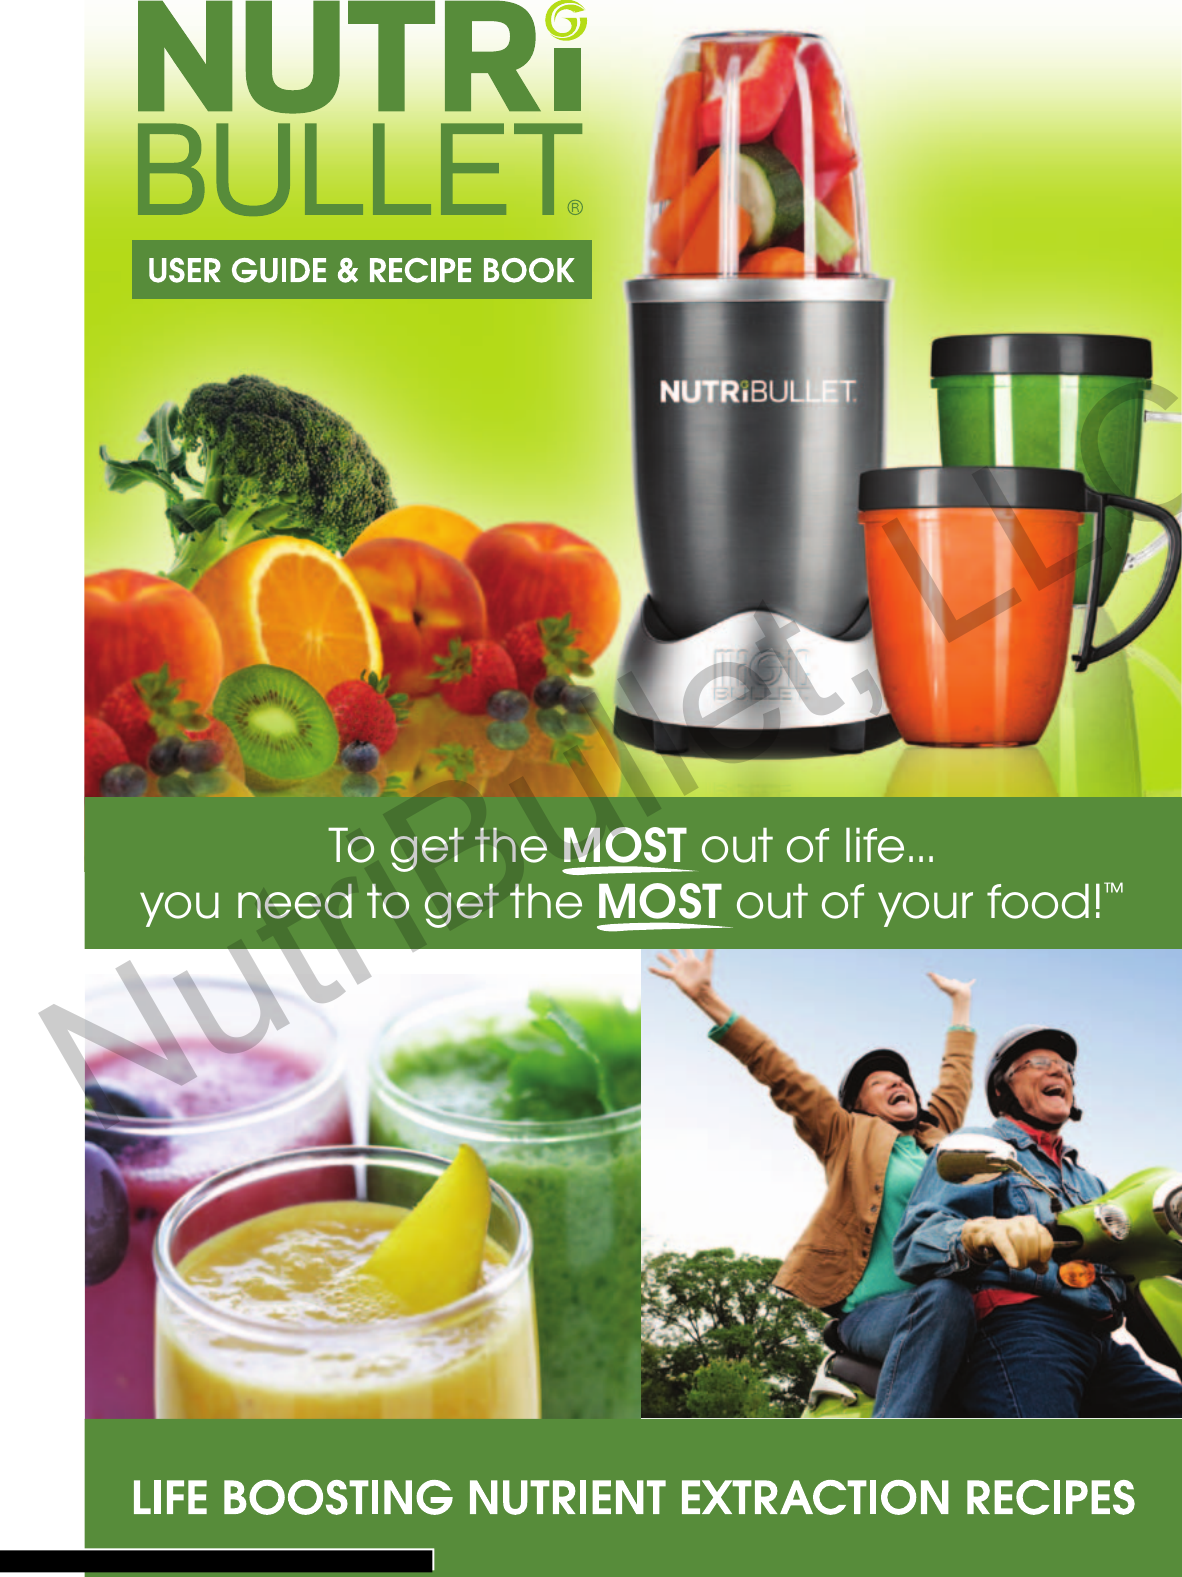 Nutribullet Users Manual 820286 Manualslib Makes It Easy To Find